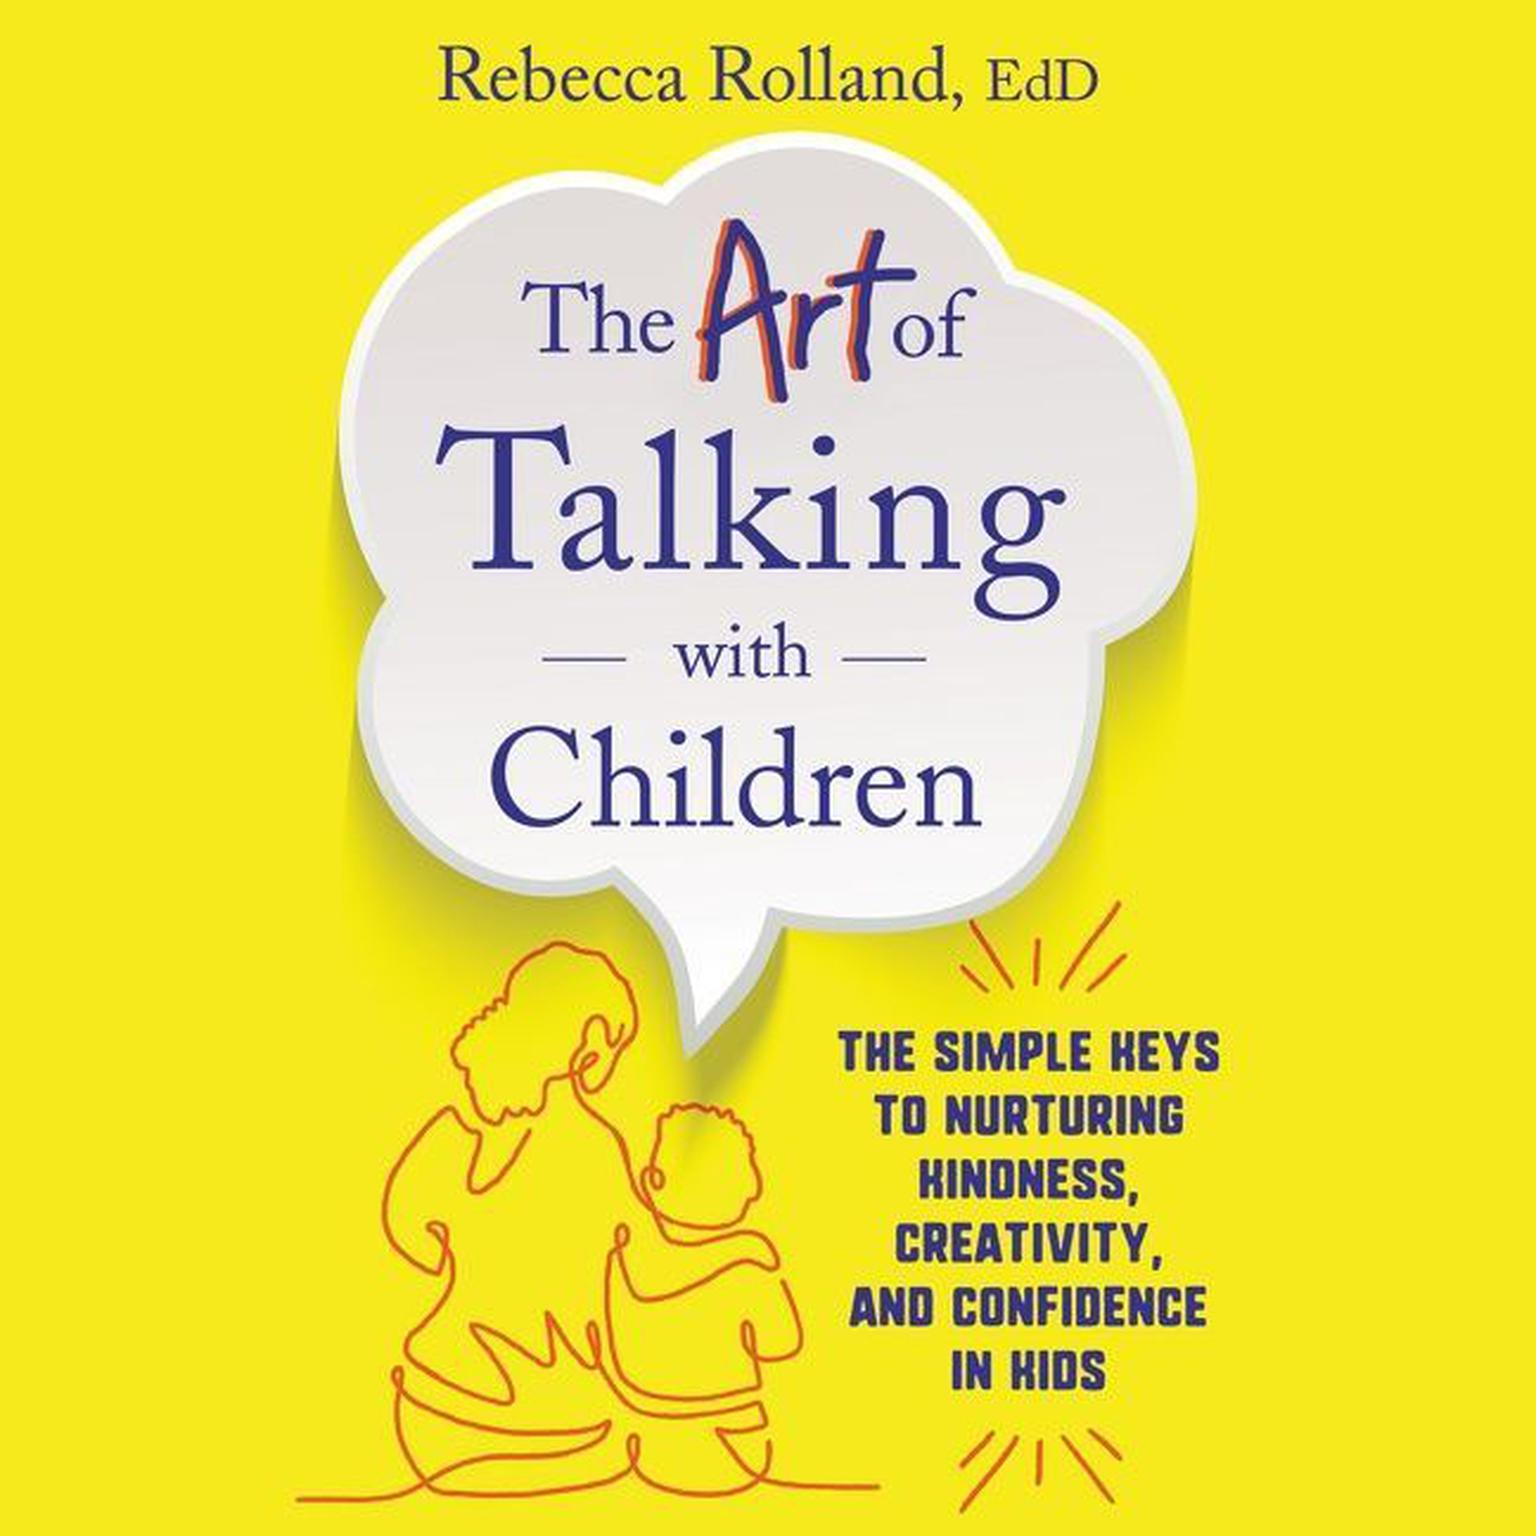 The Art of Talking with Children: The Simple Keys to Nurturing Kindness, Creativity, and Confidence in Kids Audiobook, by Rebecca Rolland